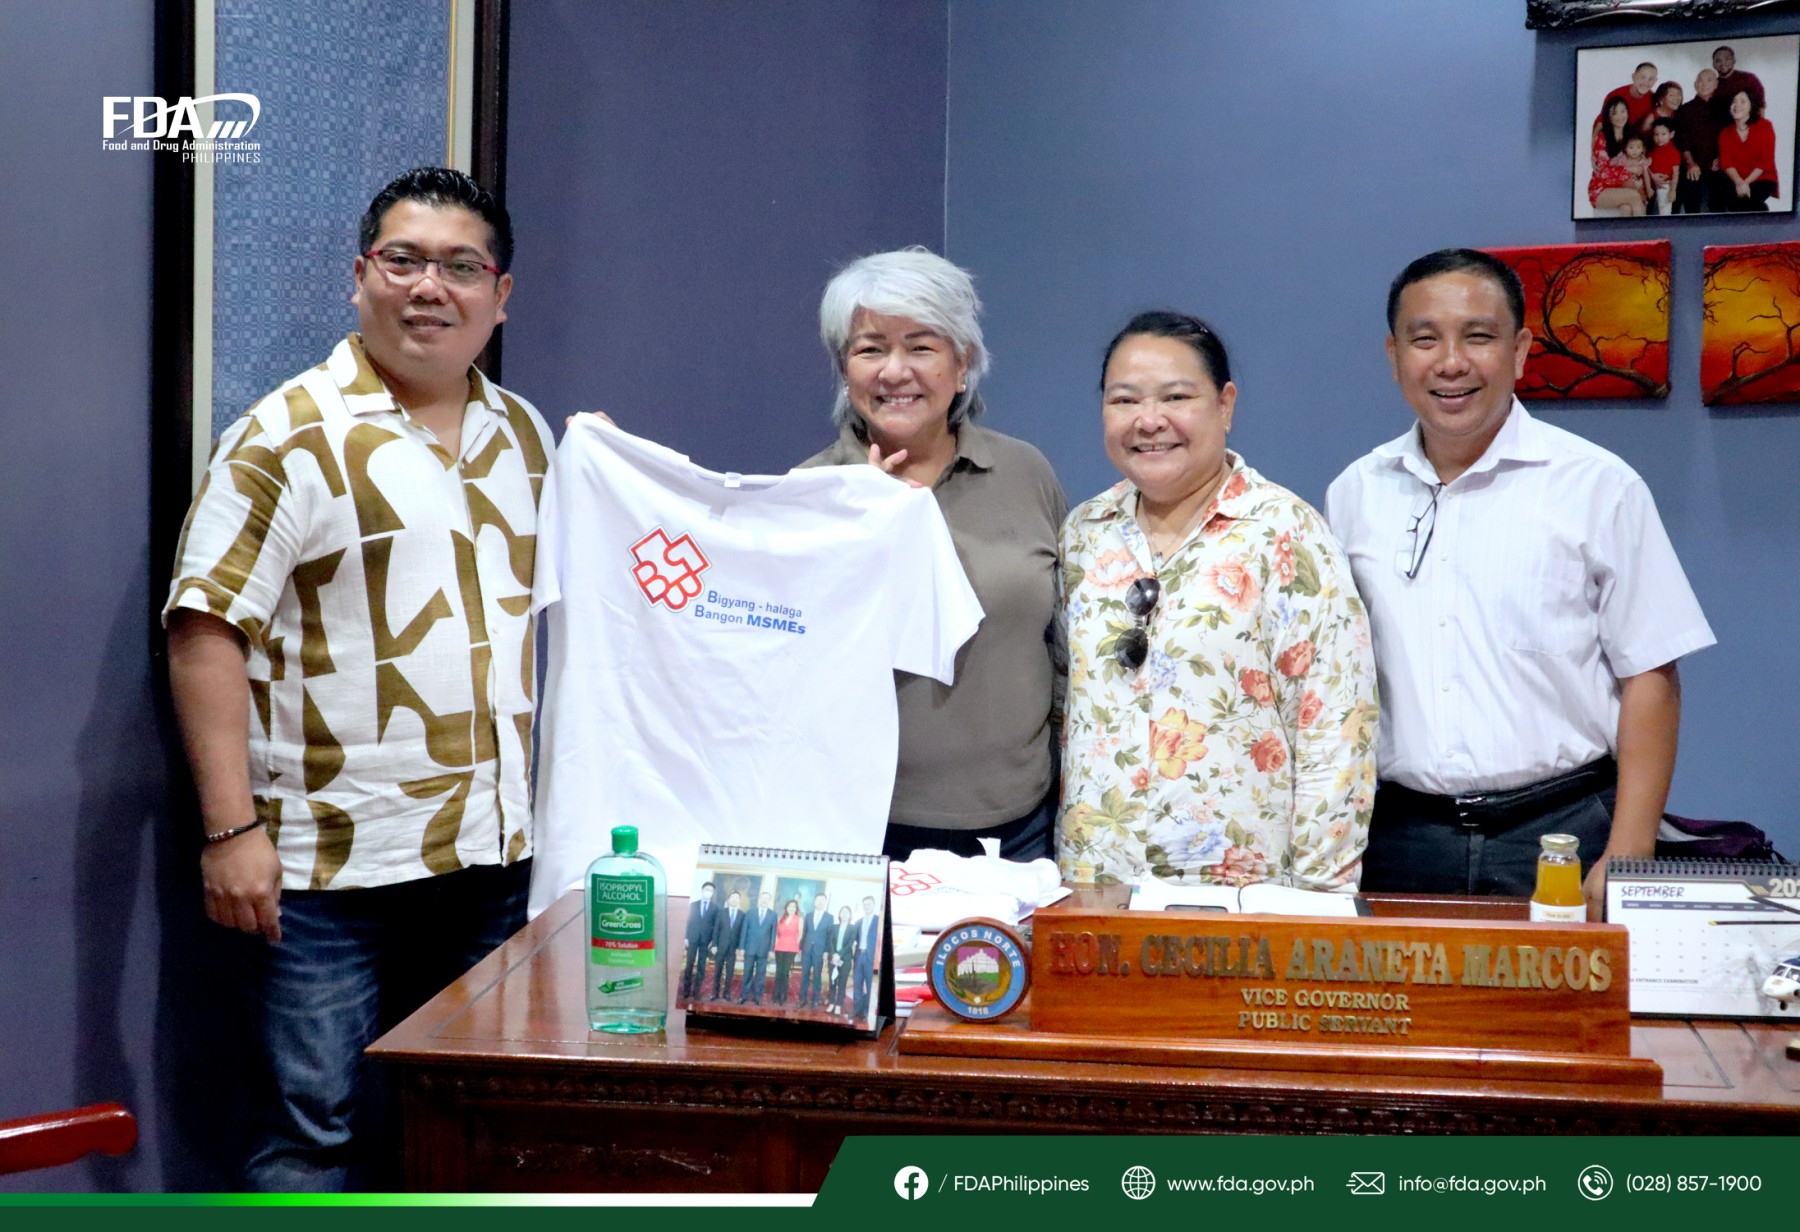 Featured Activity || On 25 April 2023, at the Provincial Capitol of Ilocos Norte, Laoag City. The Food and Drug Administration (FDA), led by Director General Samuel A. Zacate, conducted an official visit that further aimed to strengthen the support of the leadership of the Province of Ilocos Norte and to discuss future programs and collaboration of the Province with the FDA, Vice Governor Cecile Araneta-Marcos graced the meeting with her presence and to show appreciation for the agency’s efforts to protect the public from unsafe and ineffective health products and to promote consumer safety in Ilocos Norte.